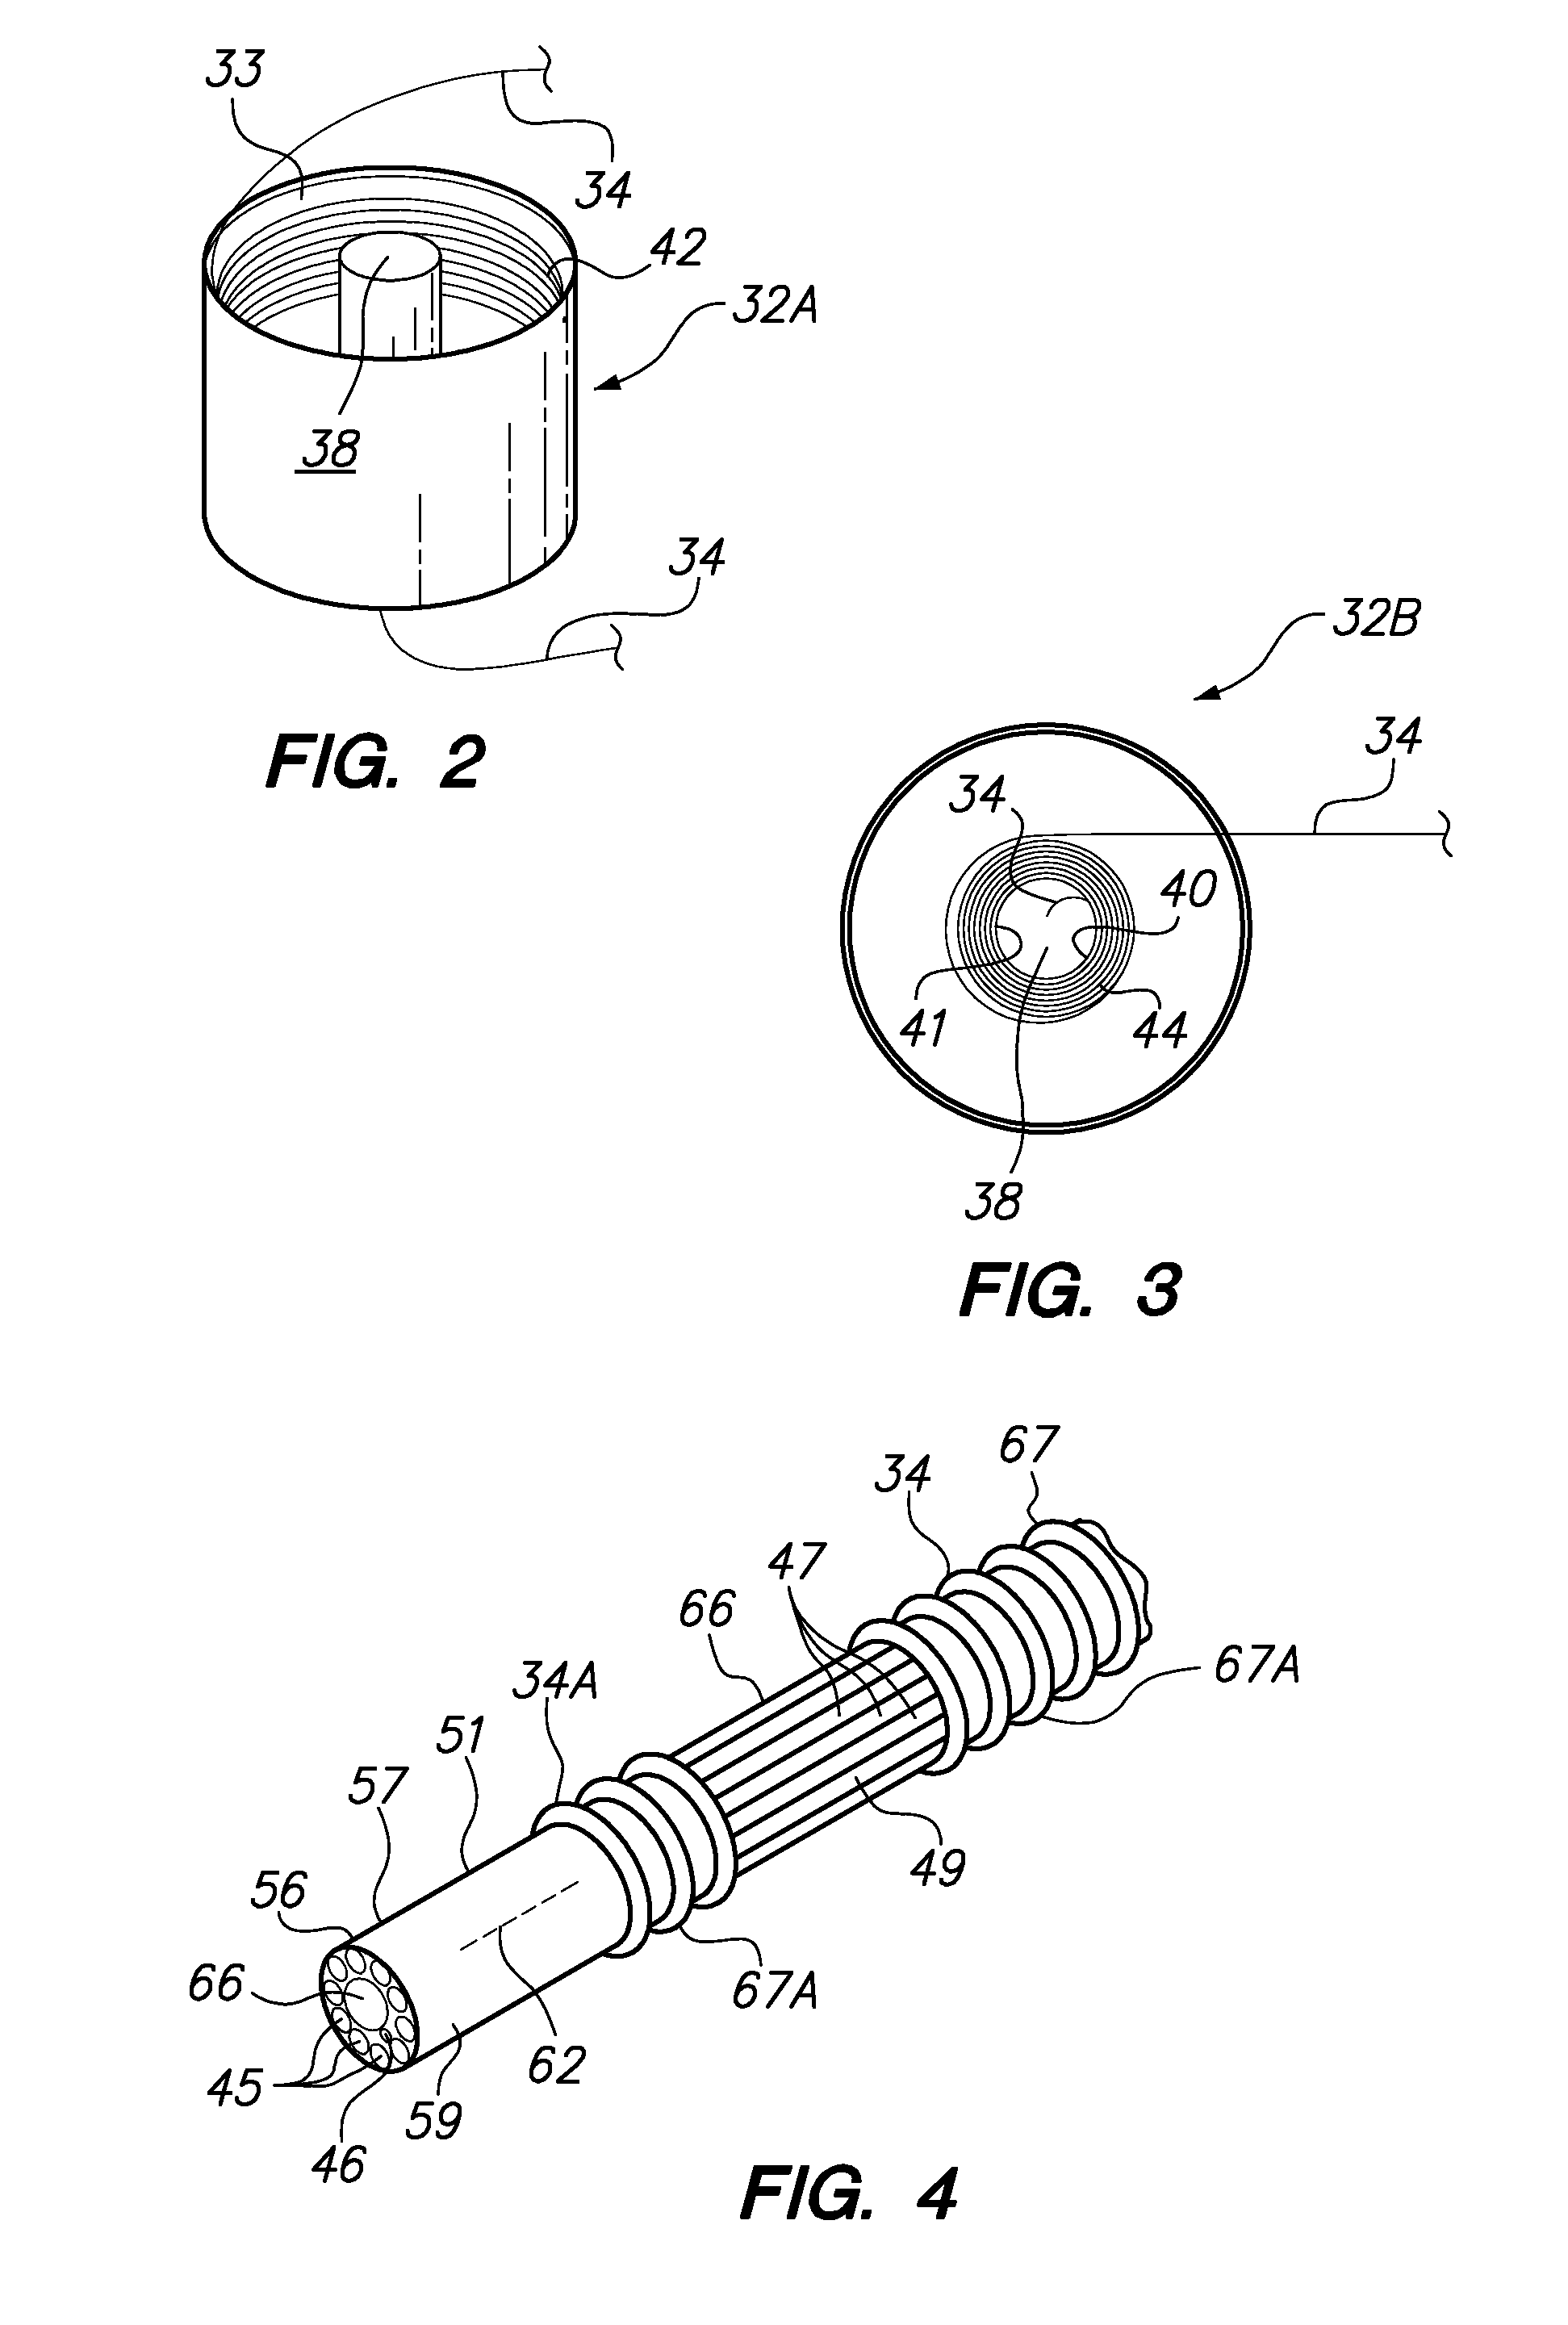 Apparatus and system to drill a bore using a laser